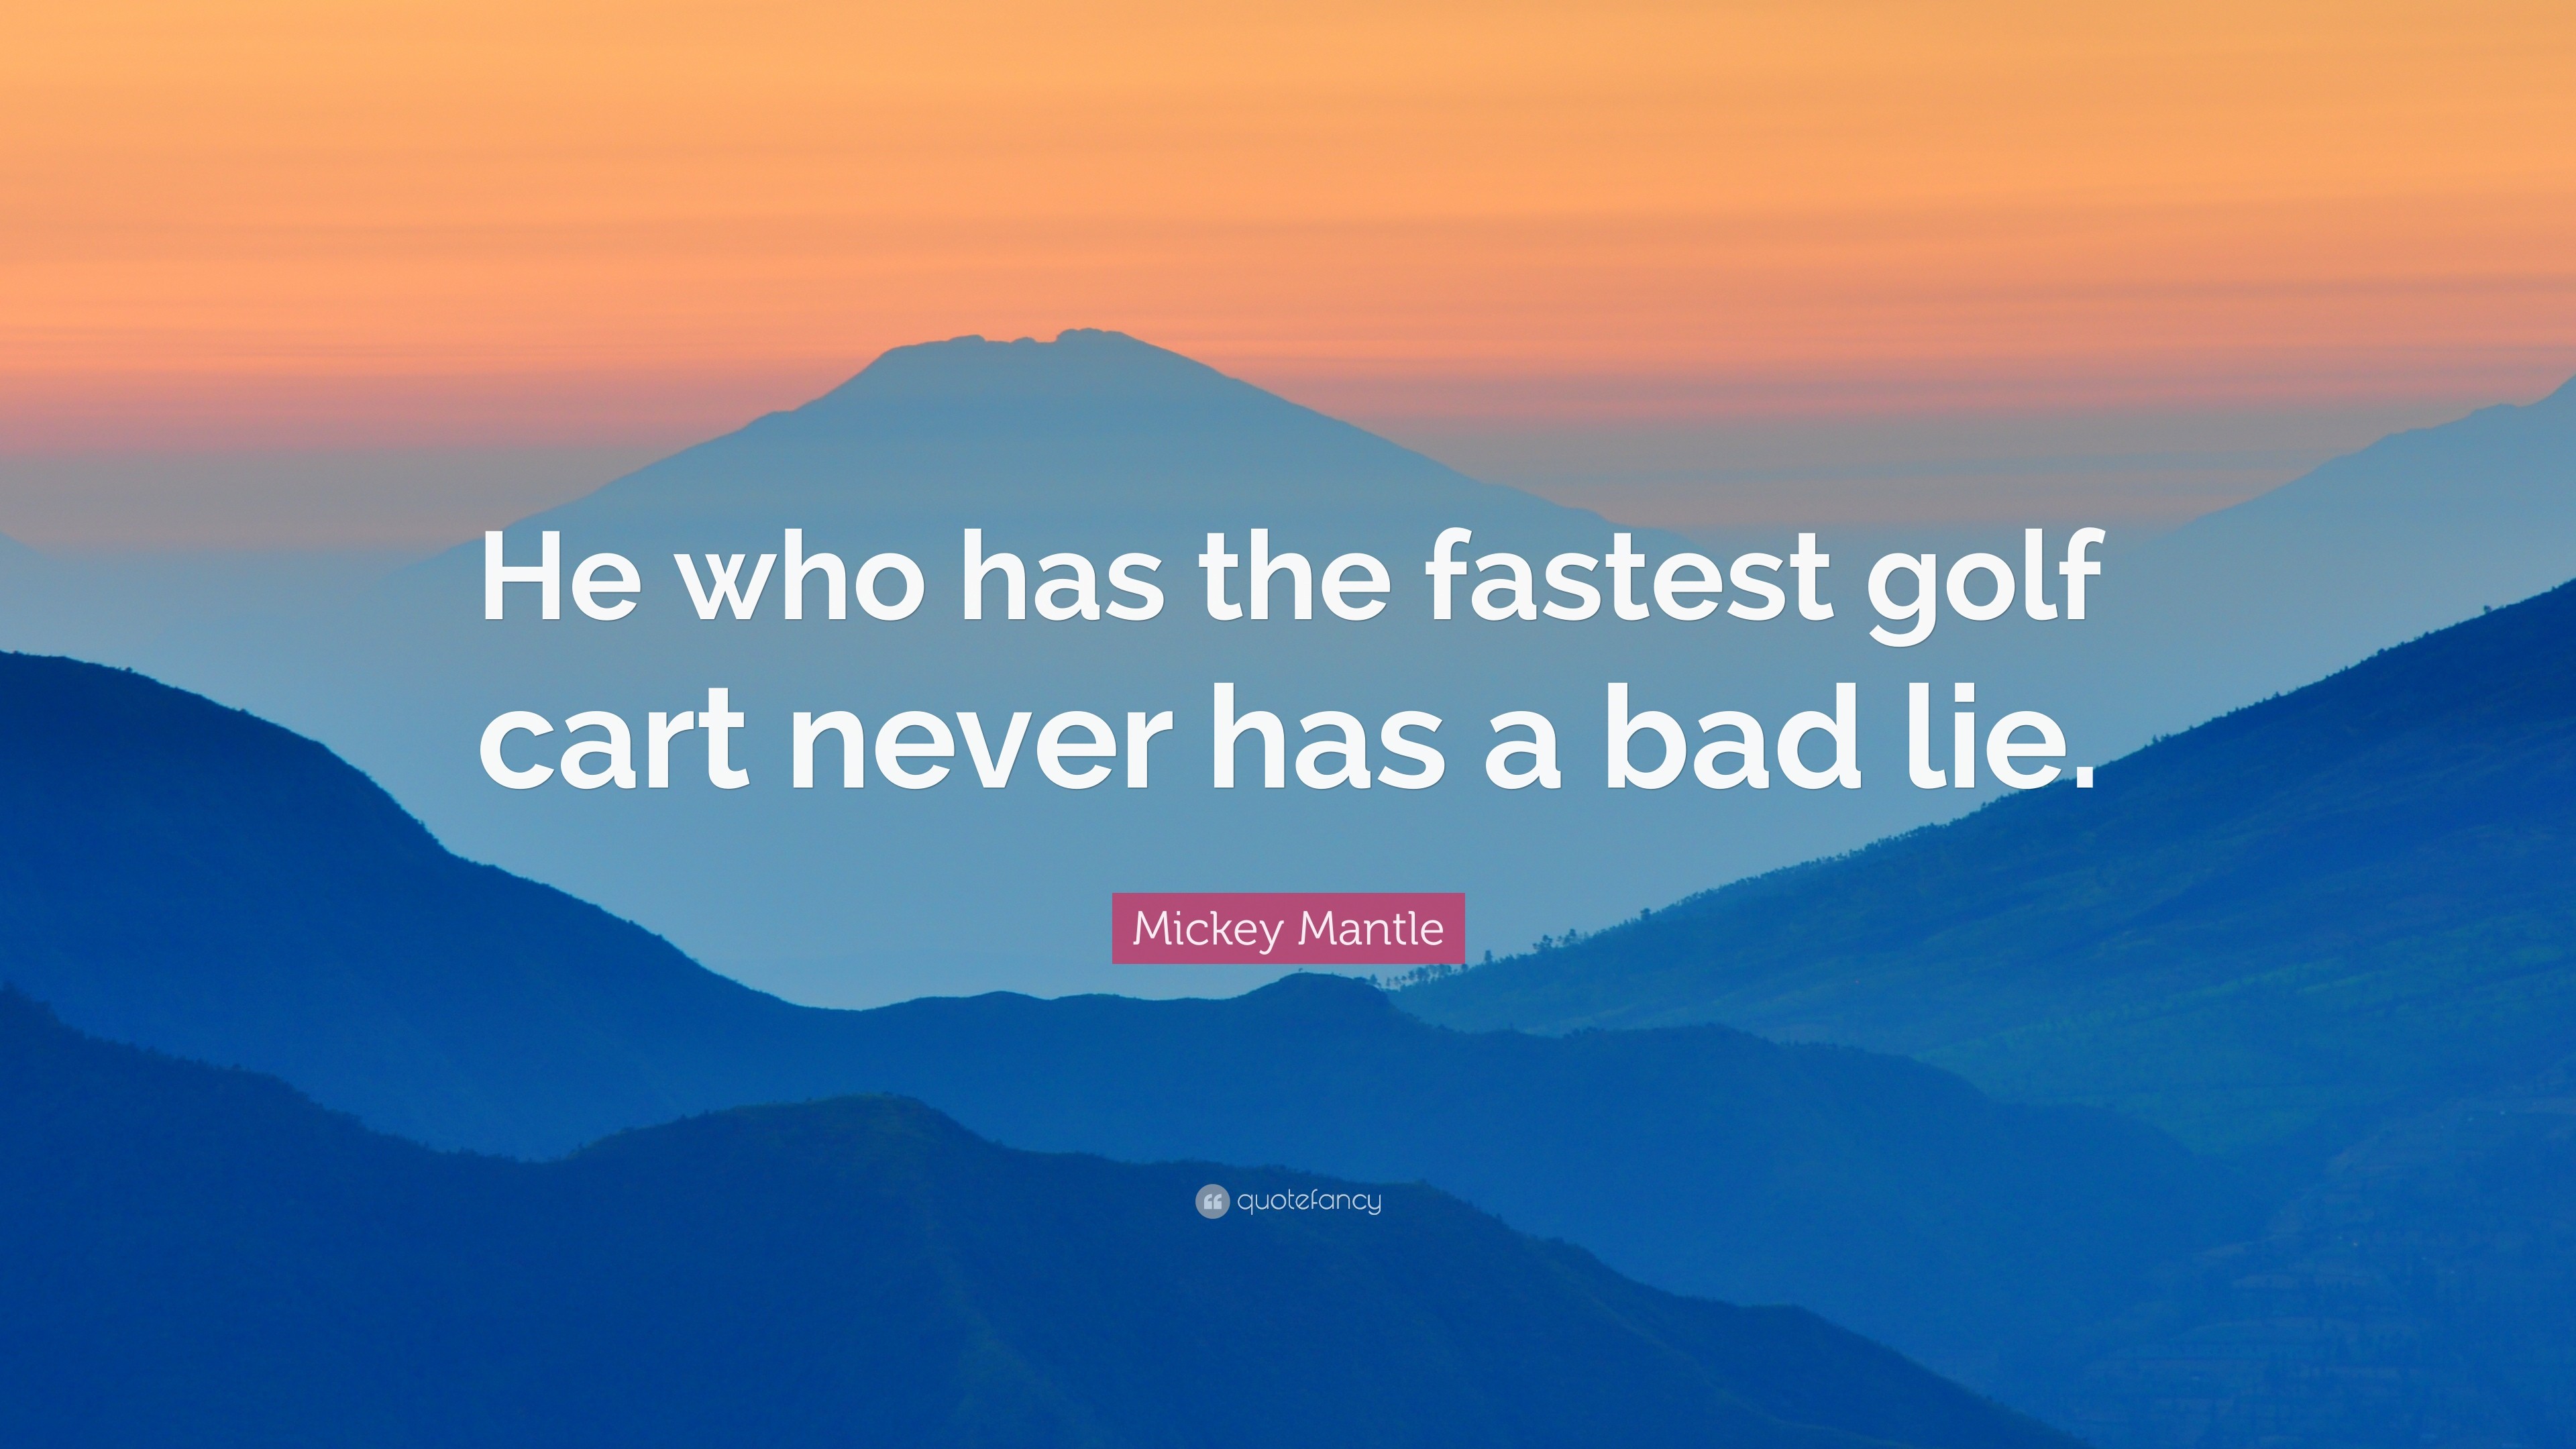 Mickey Mantle Quote He who has the fastest golf cart never has a bad